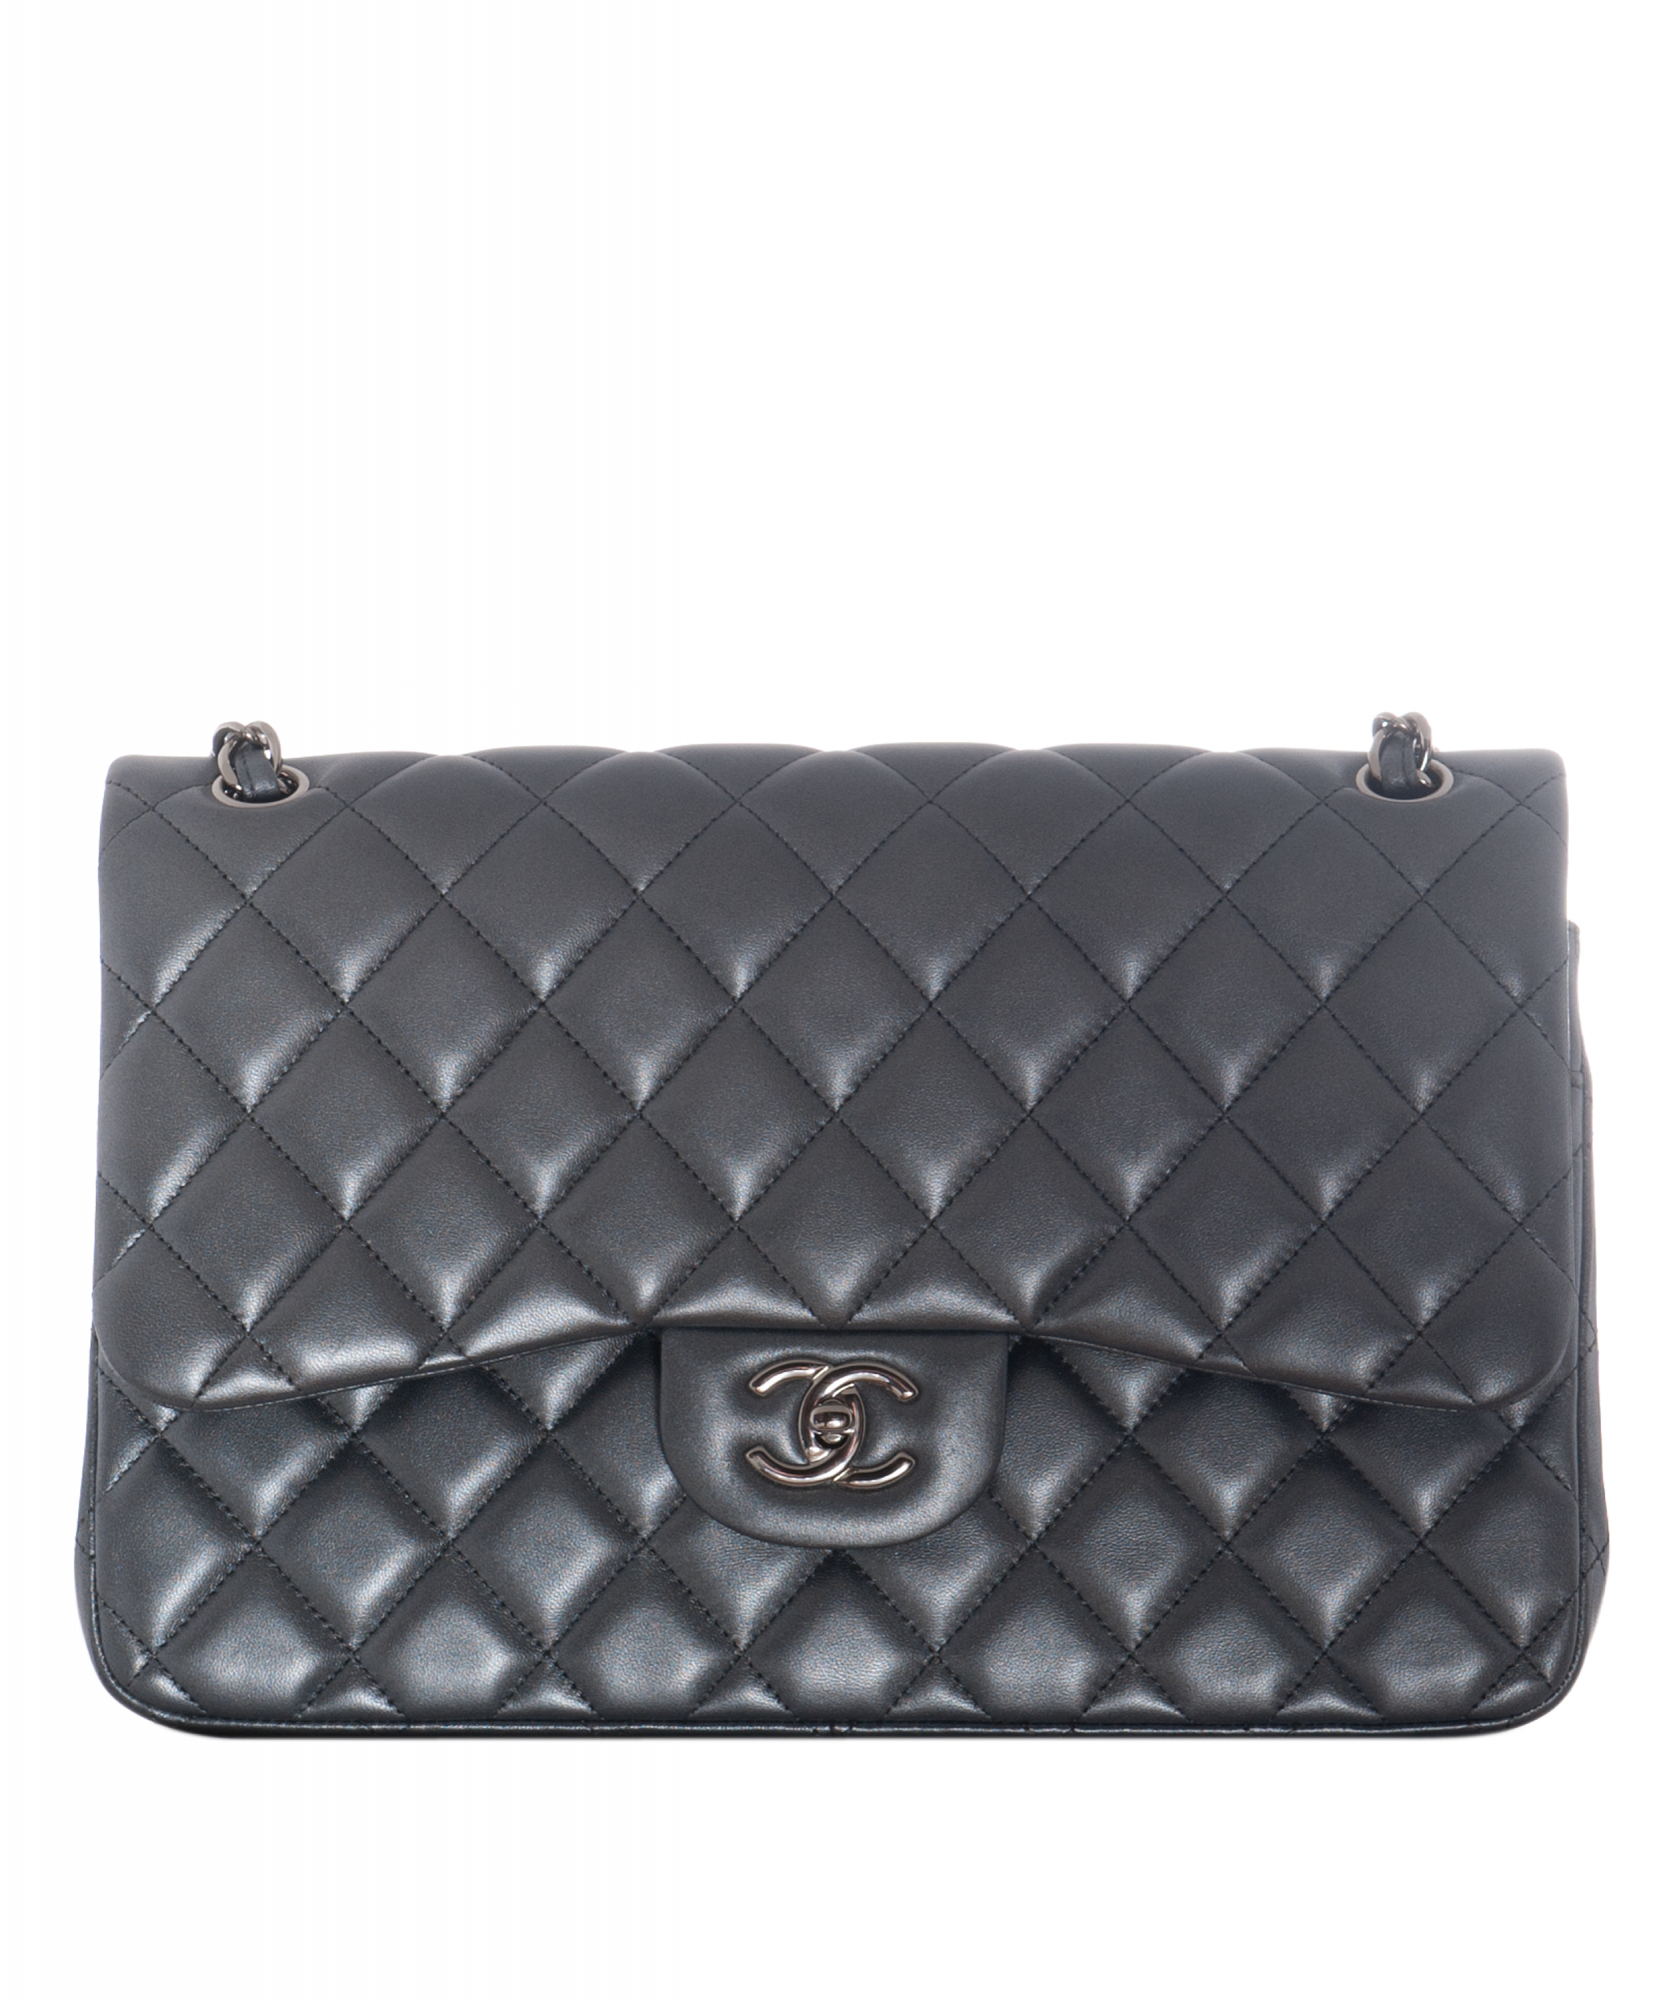 Chanel Grey Quilted Lambskin Leather Classic Large Double Flap Bag